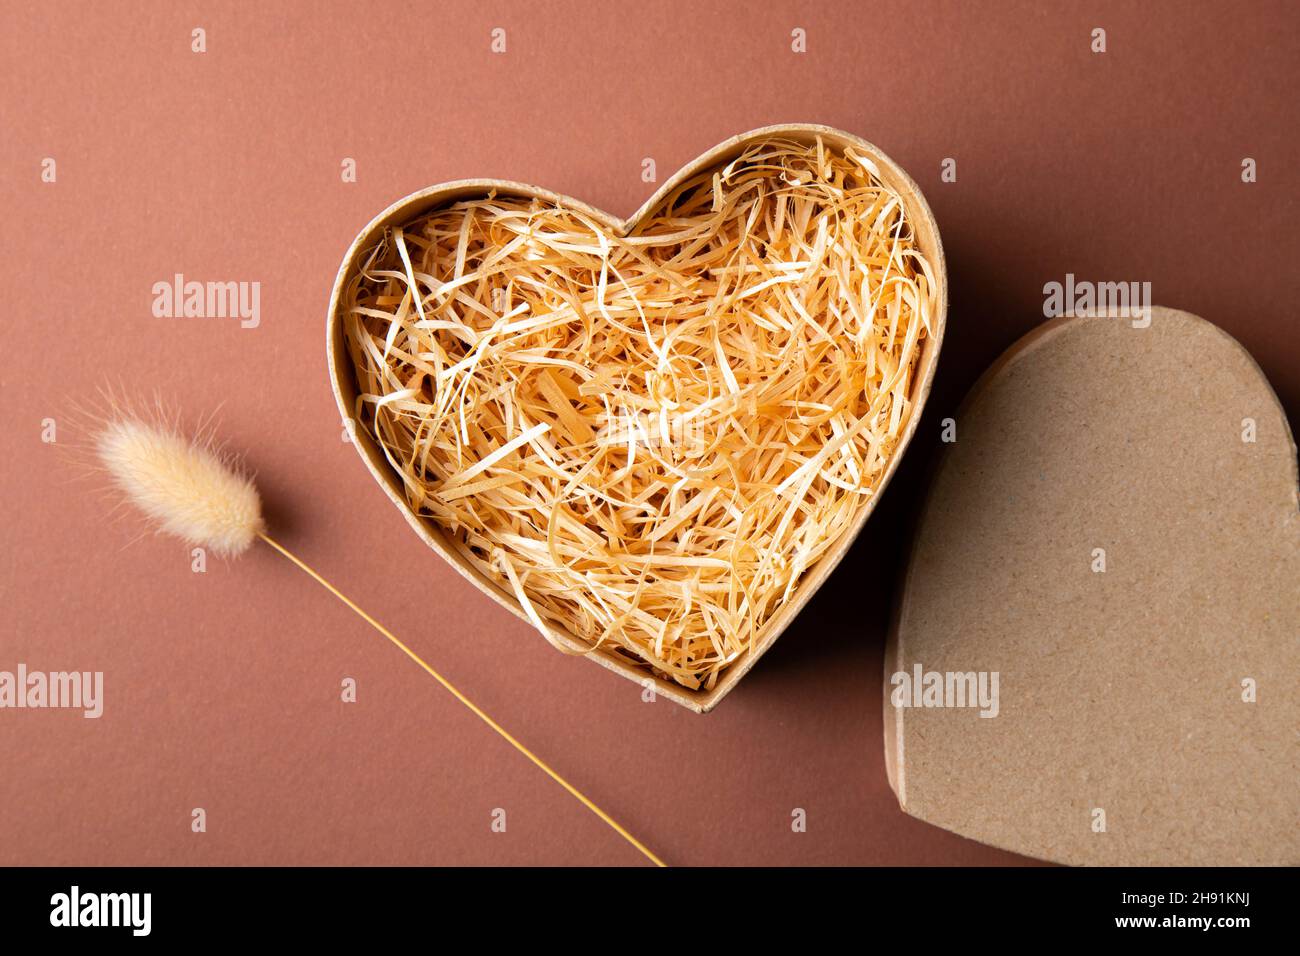 Top view of natural color open heart shape cardboard box with shredded wood excelsior for filling inside, pastel brown background. Natural sustainable Stock Photo